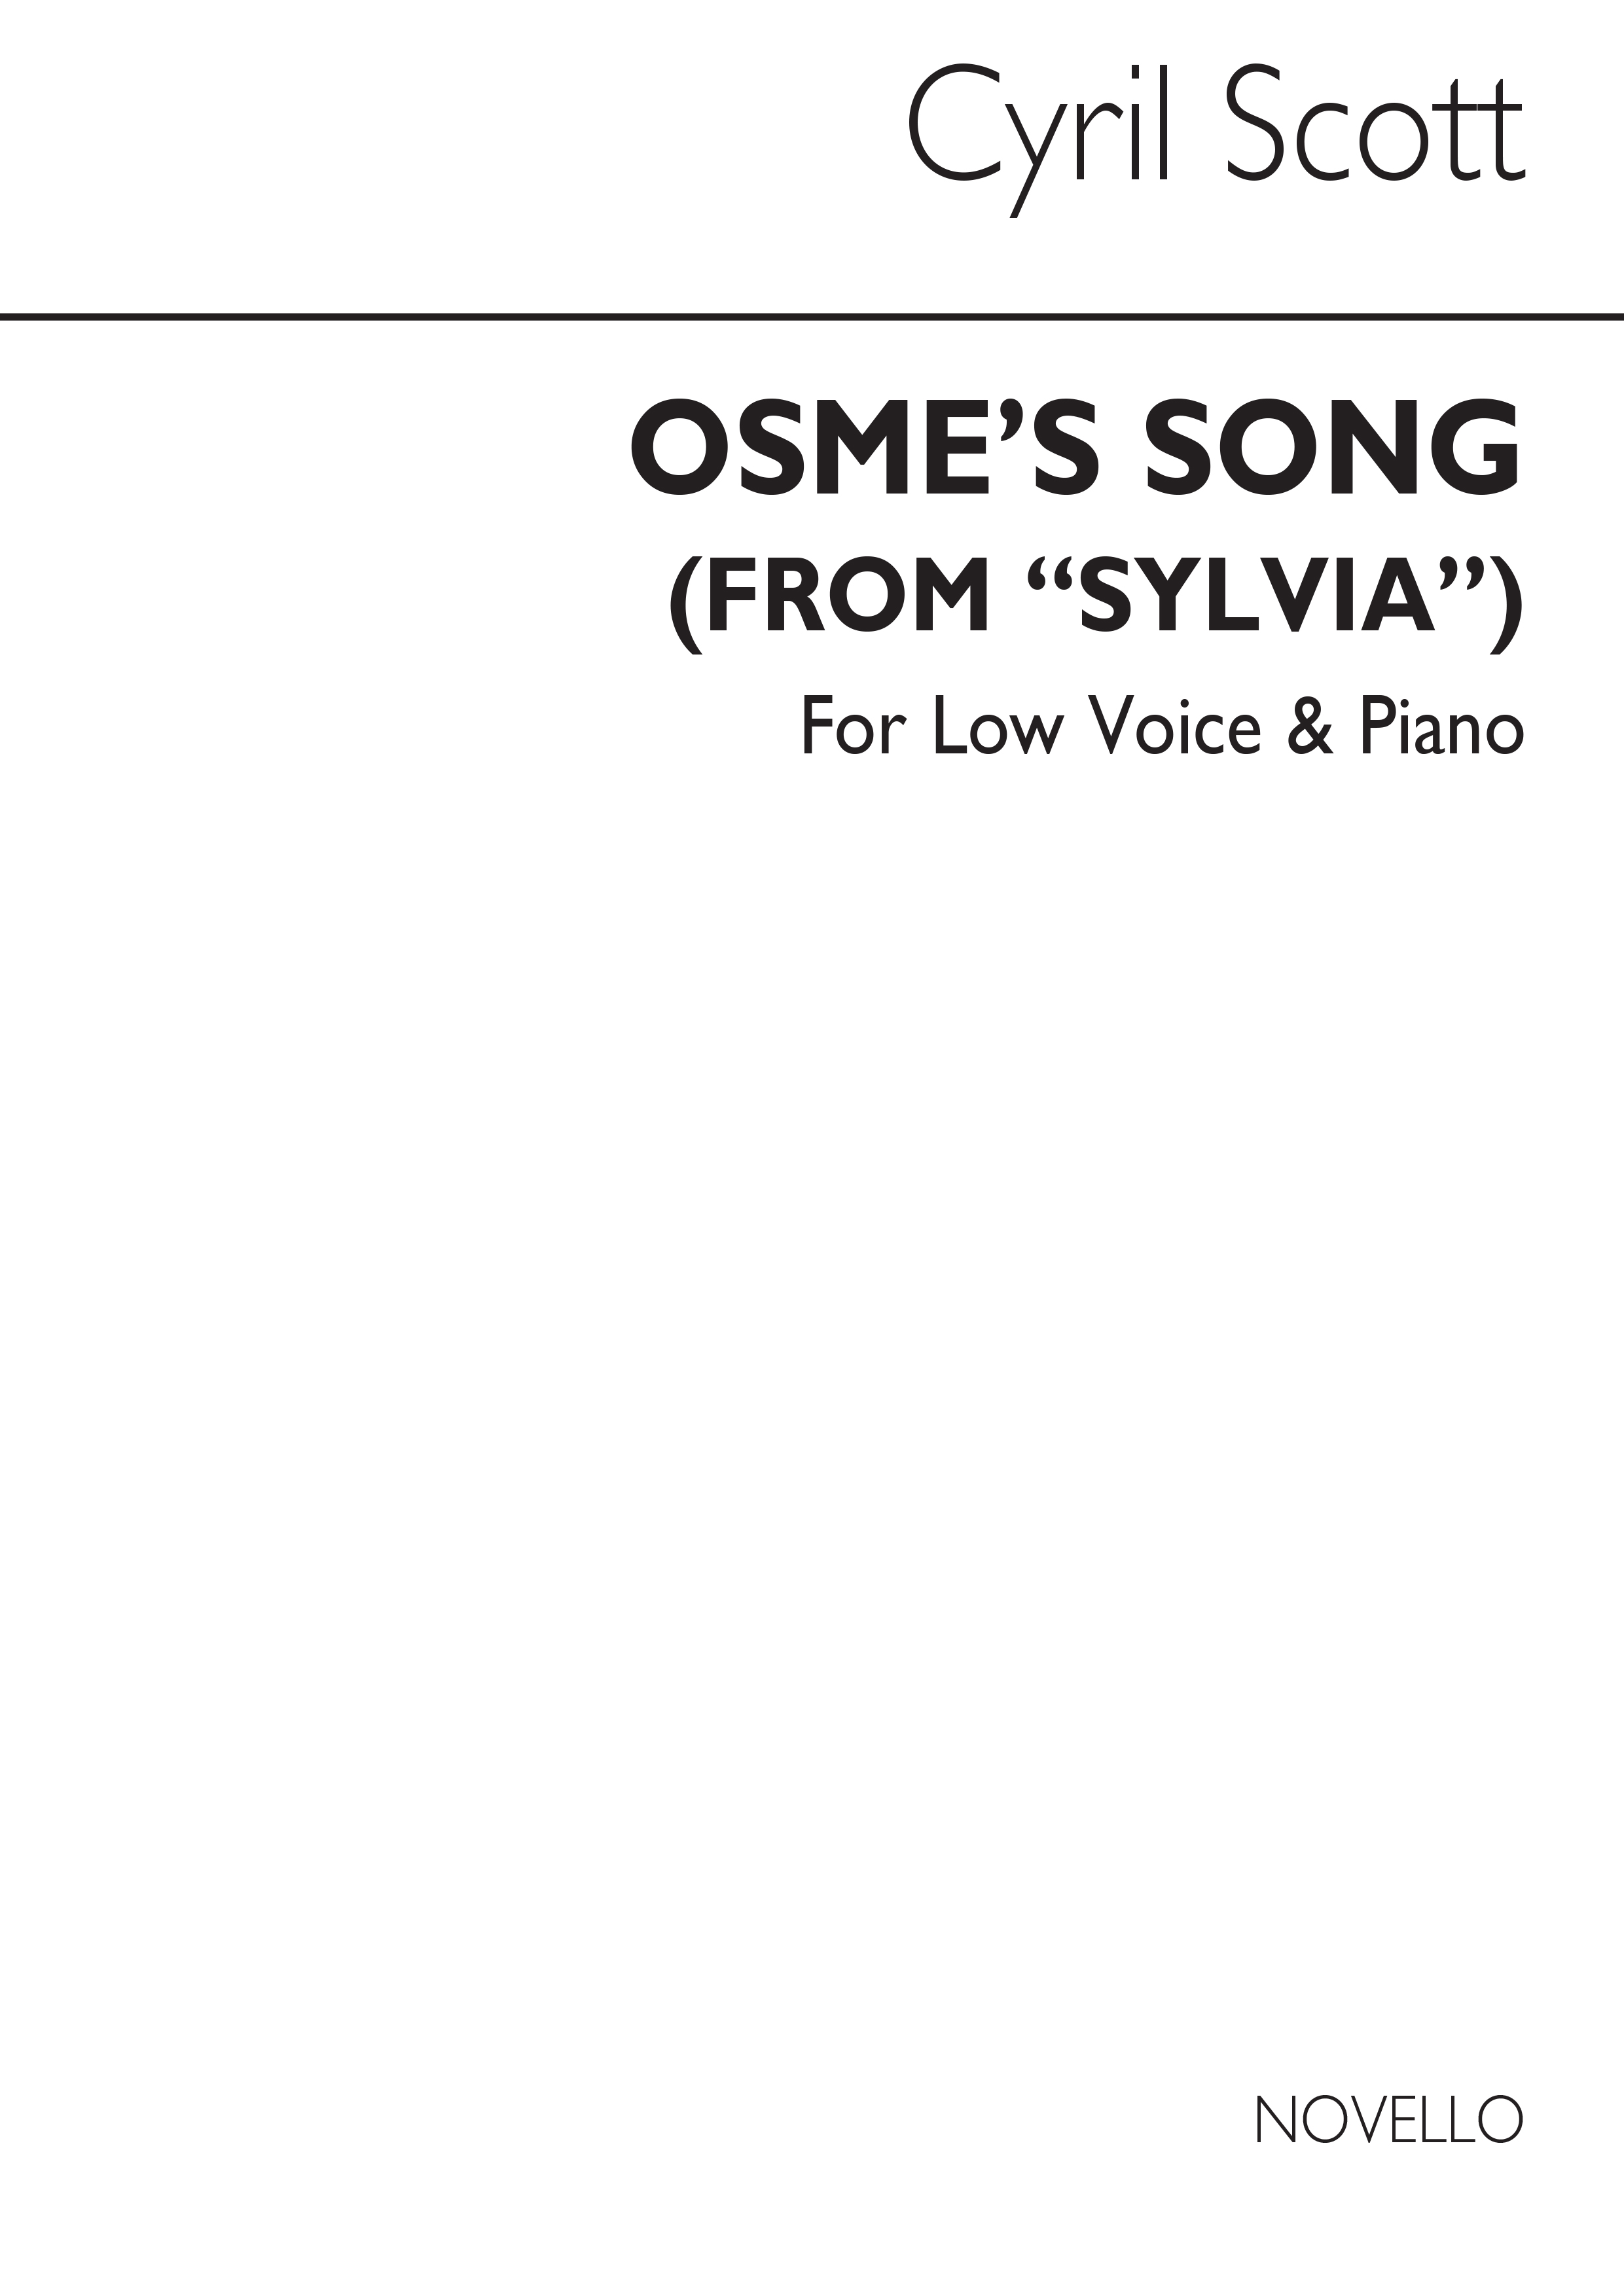 Cyril Scott: Osme's Song (From Sylvia) Op68 No.2-low Voice/Piano (Key-d)